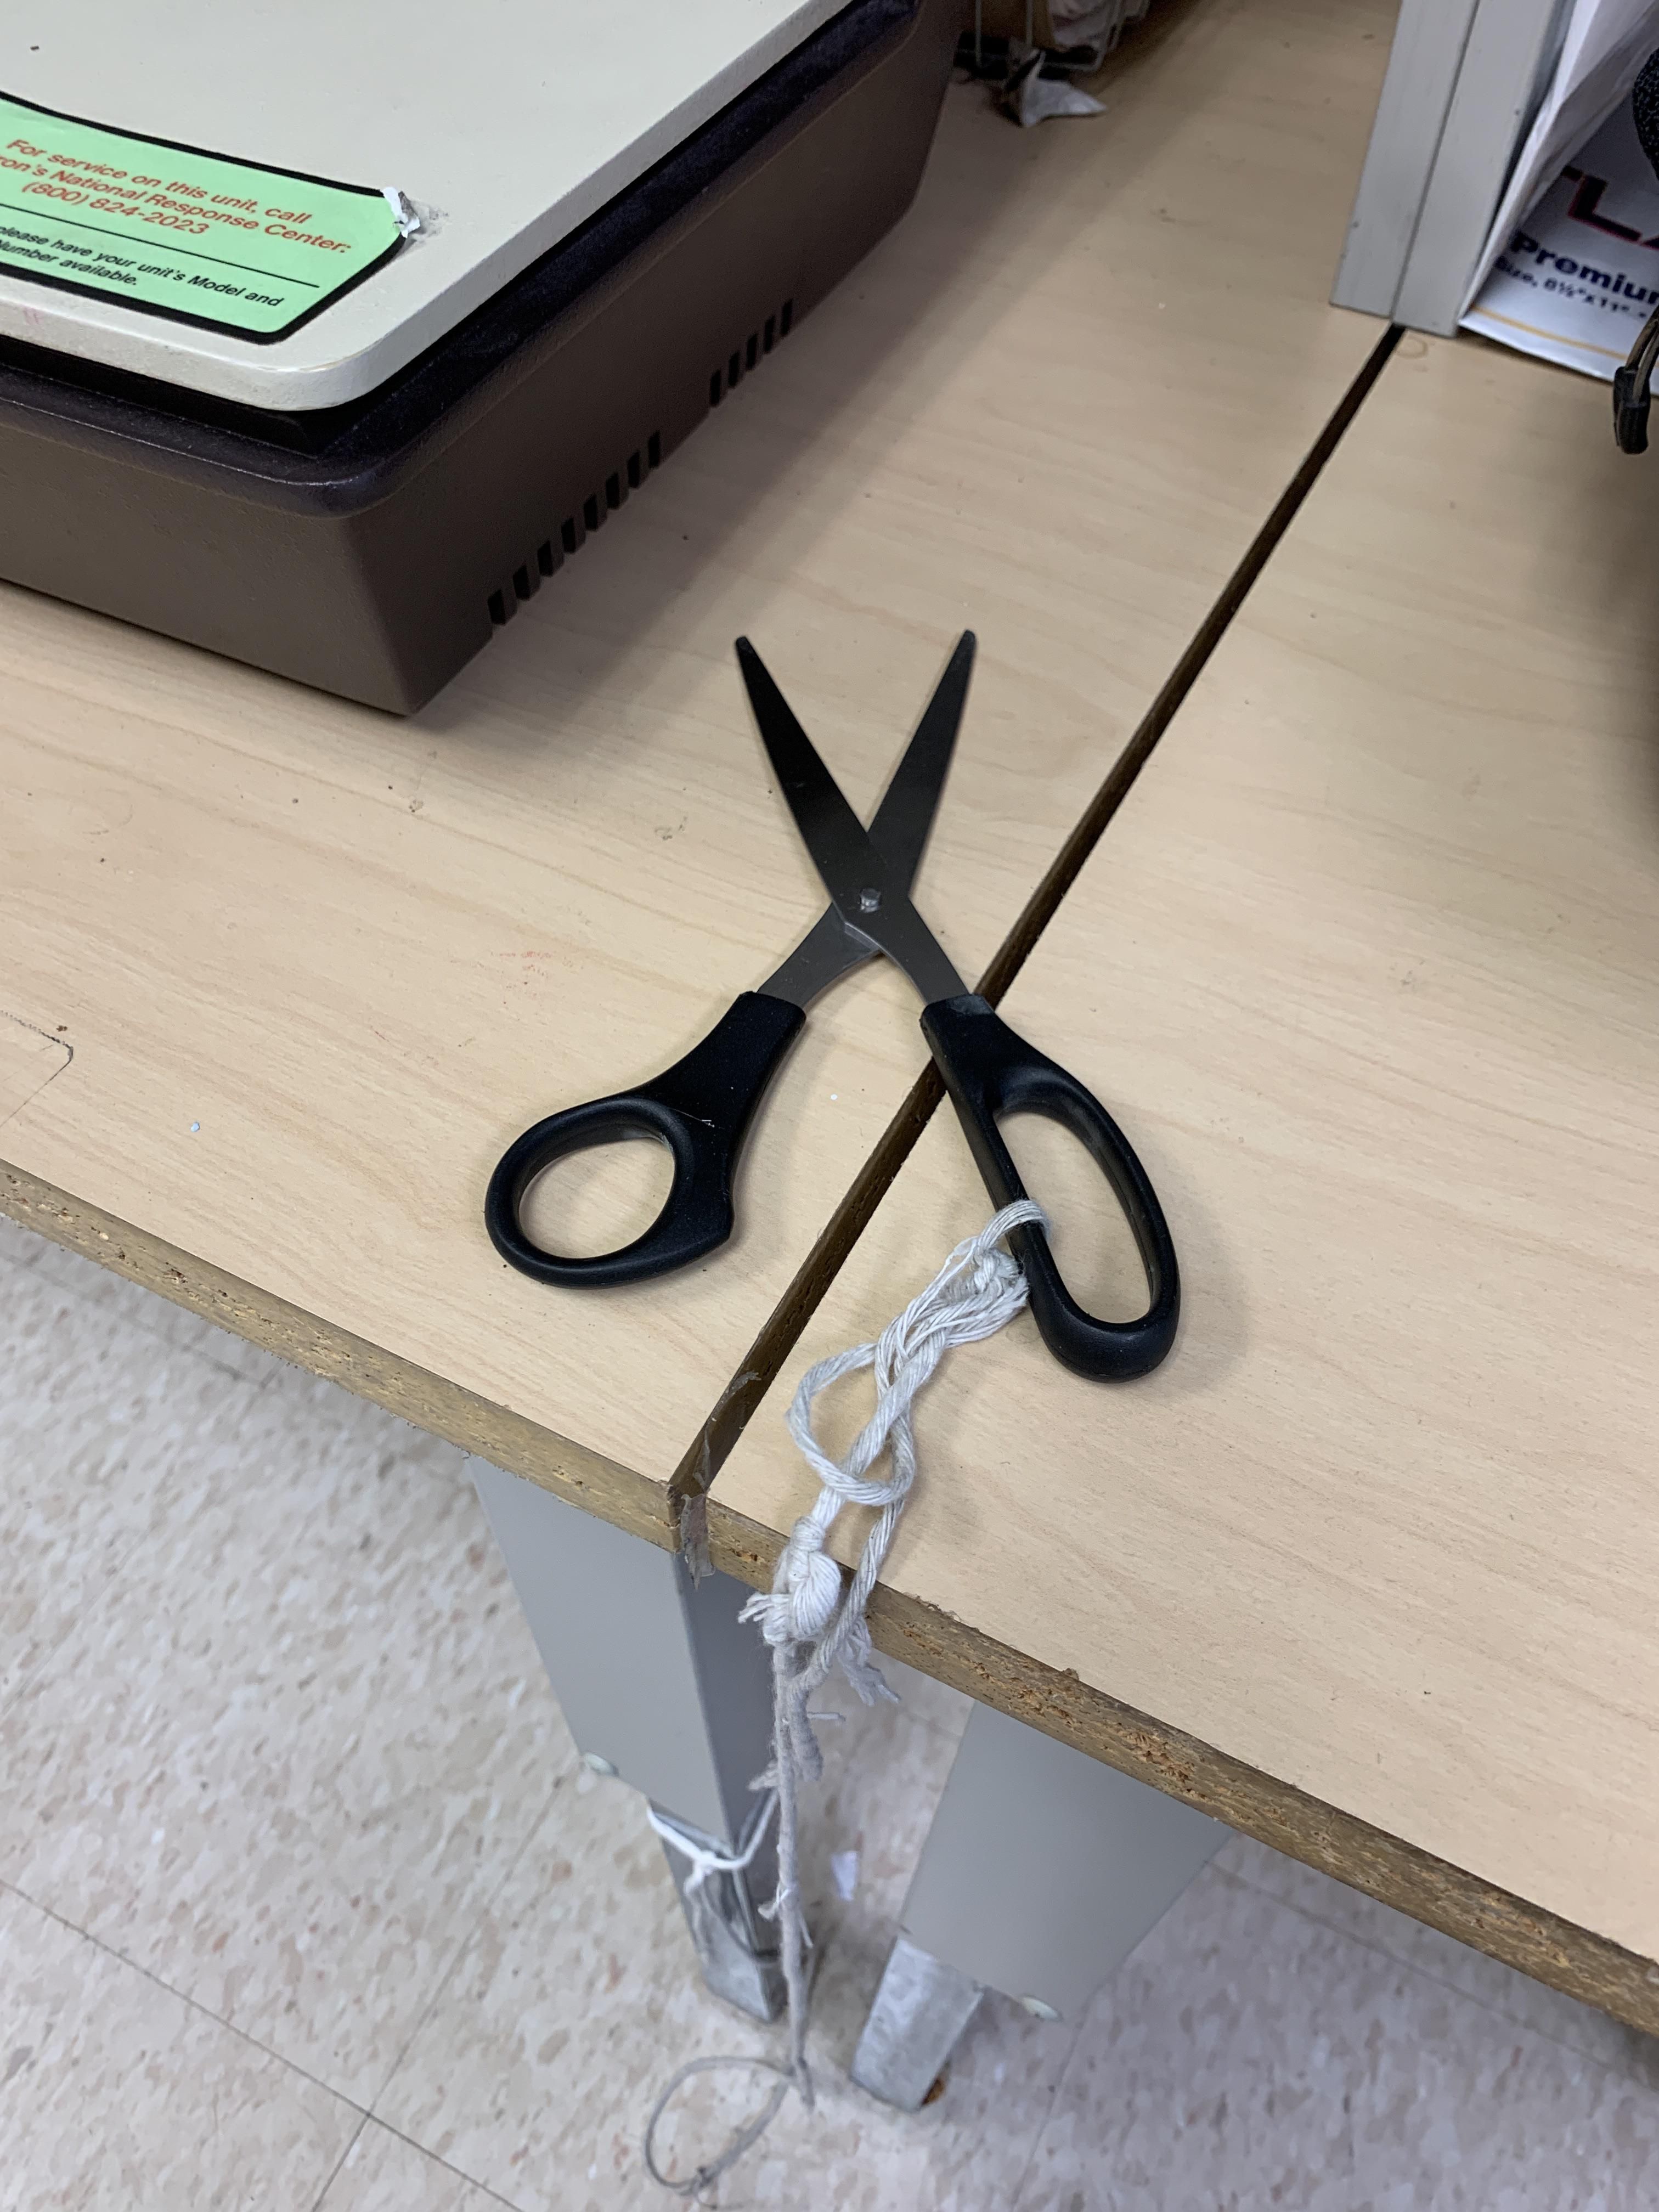 Four years since installing the “Scissor Antitheft Device.” Nobody has figured out the flaw yet.